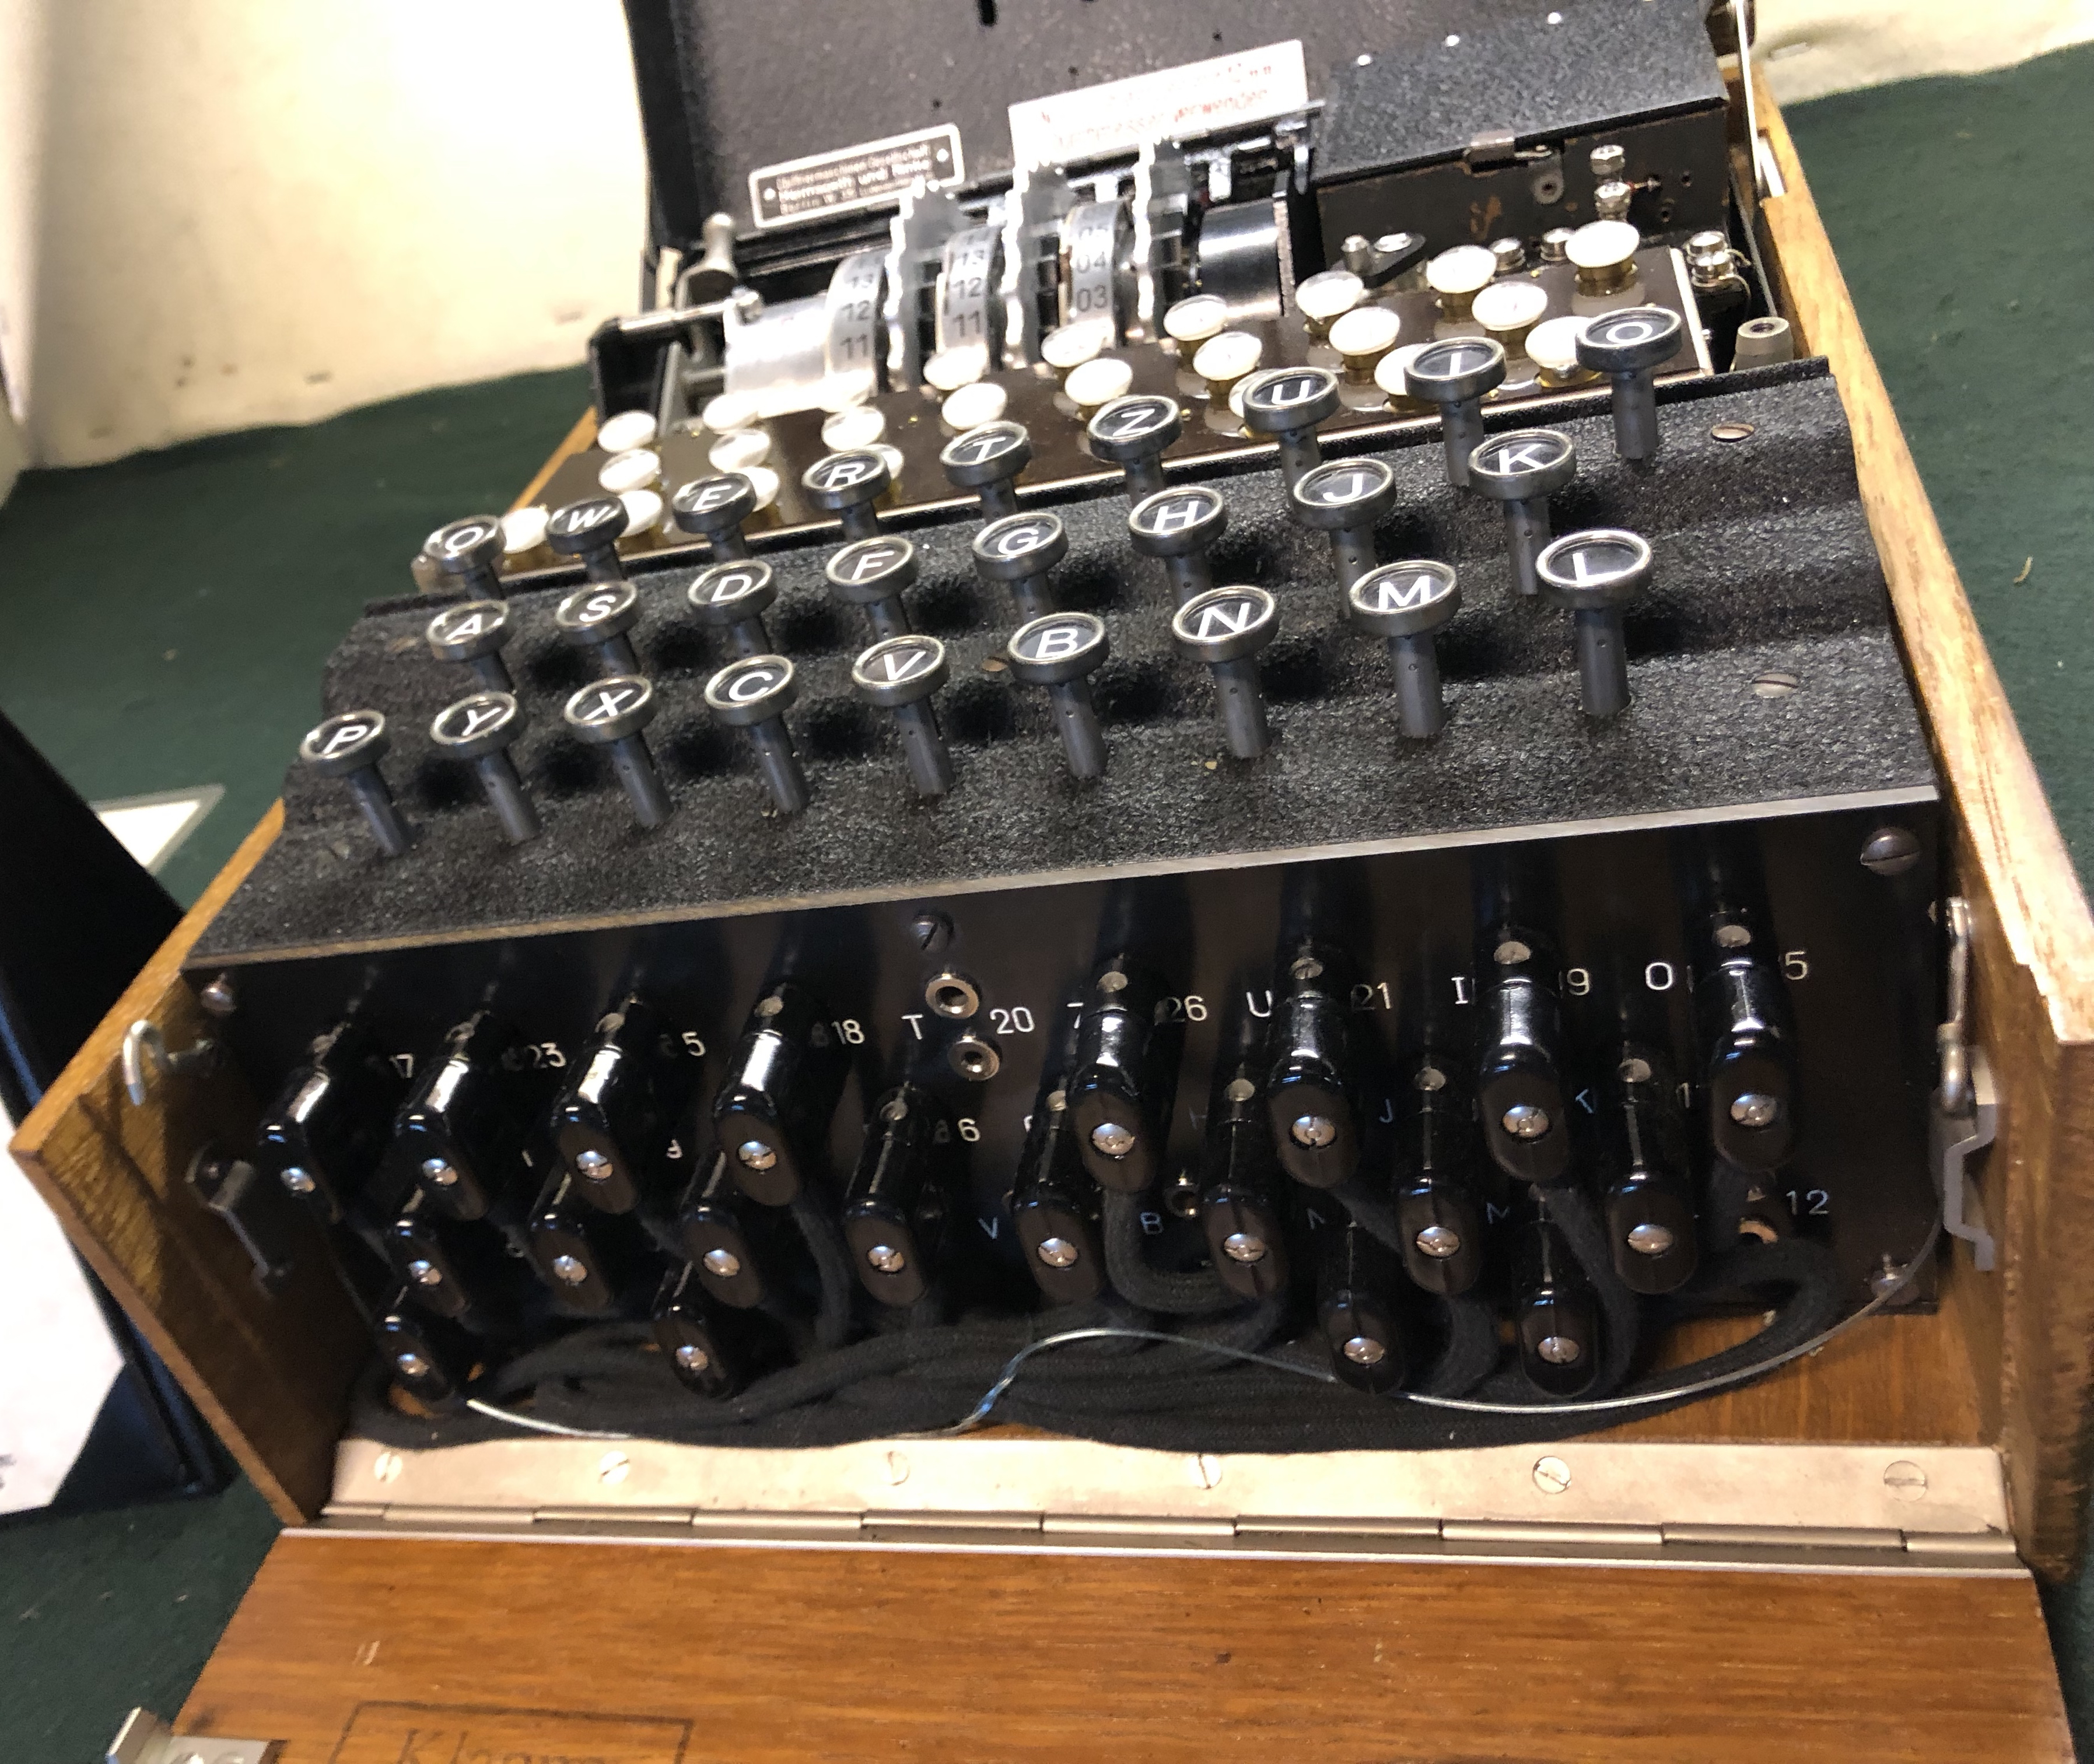 Enigma Machine A16672 at the MIT Flea Market. 19 May 2019 by ArnoldReinhold. Posted online at https://commons.wikimedia.org/wiki/File:Enigma_Machine_A16672_open_plugboard.agr.jpg